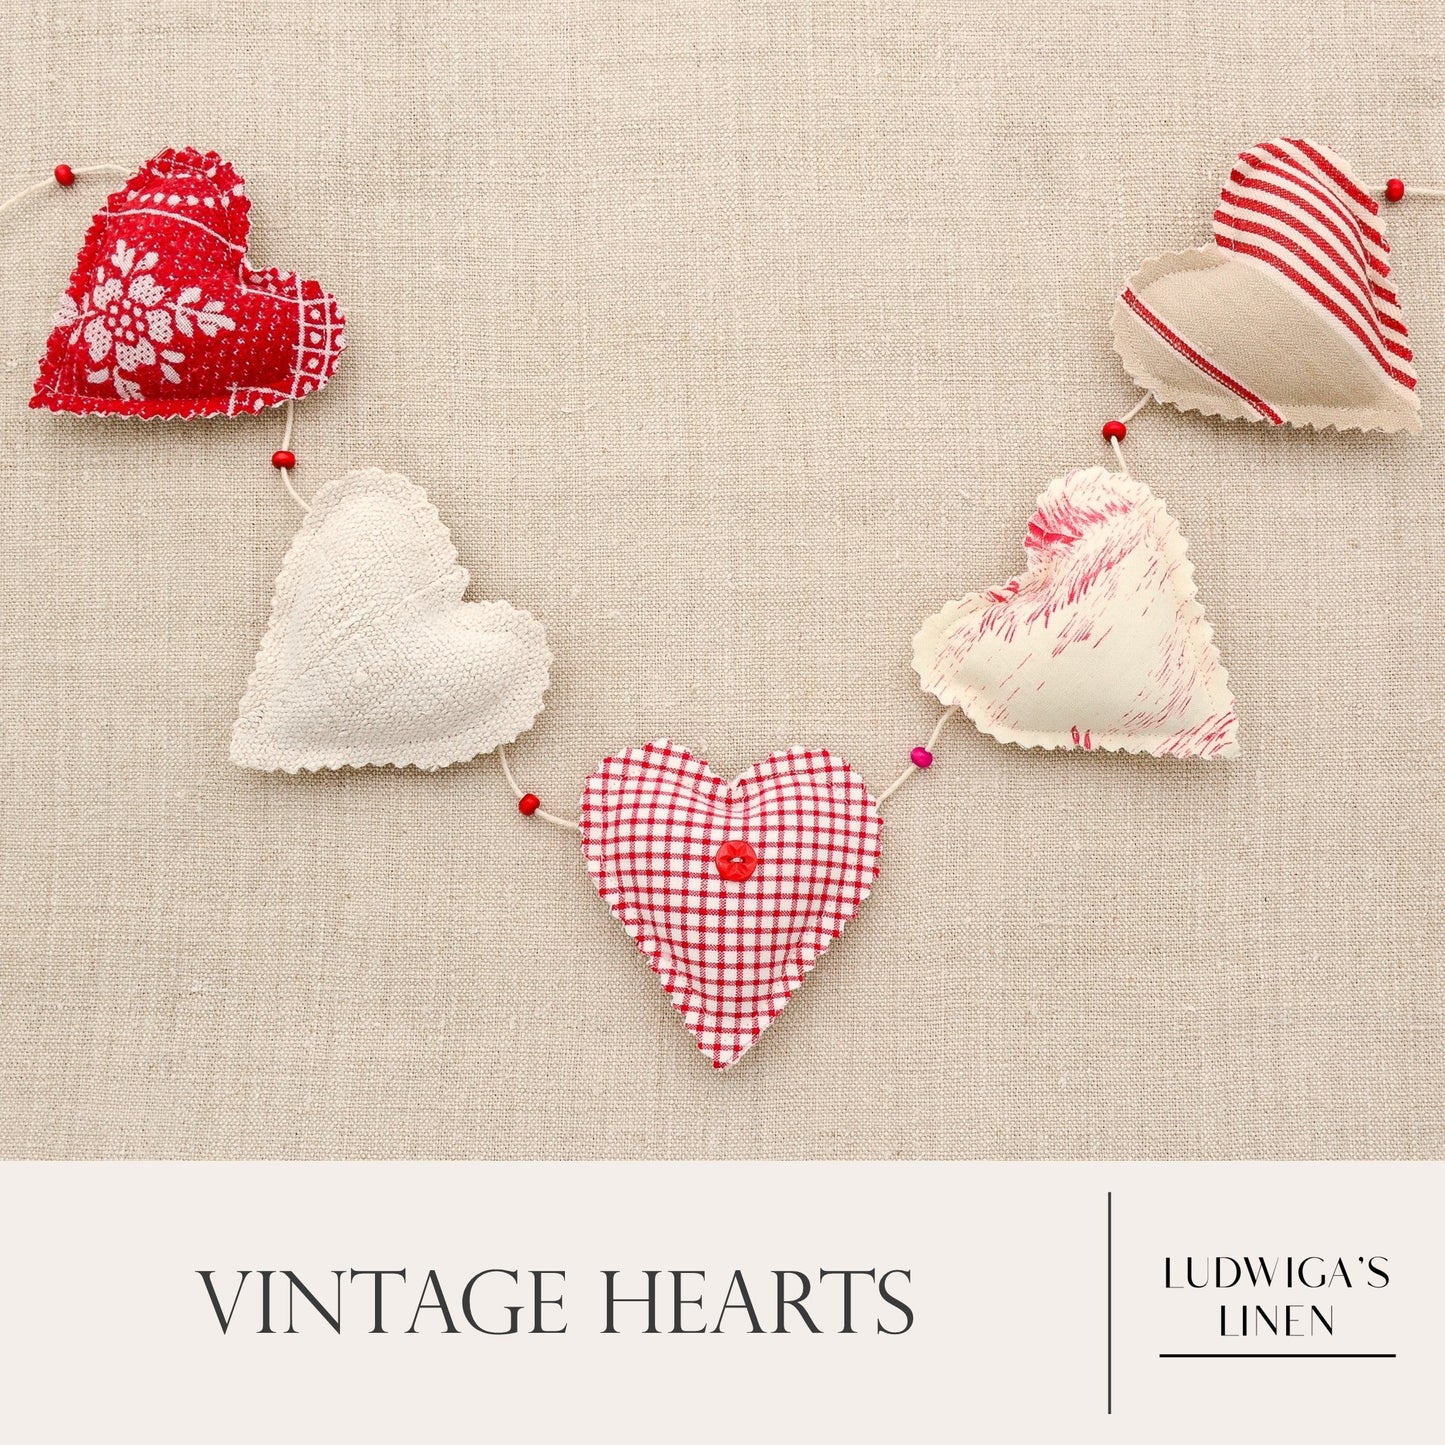 Vintage French fabric garland, five hearts, white cotton twine and wooden beads between hearts